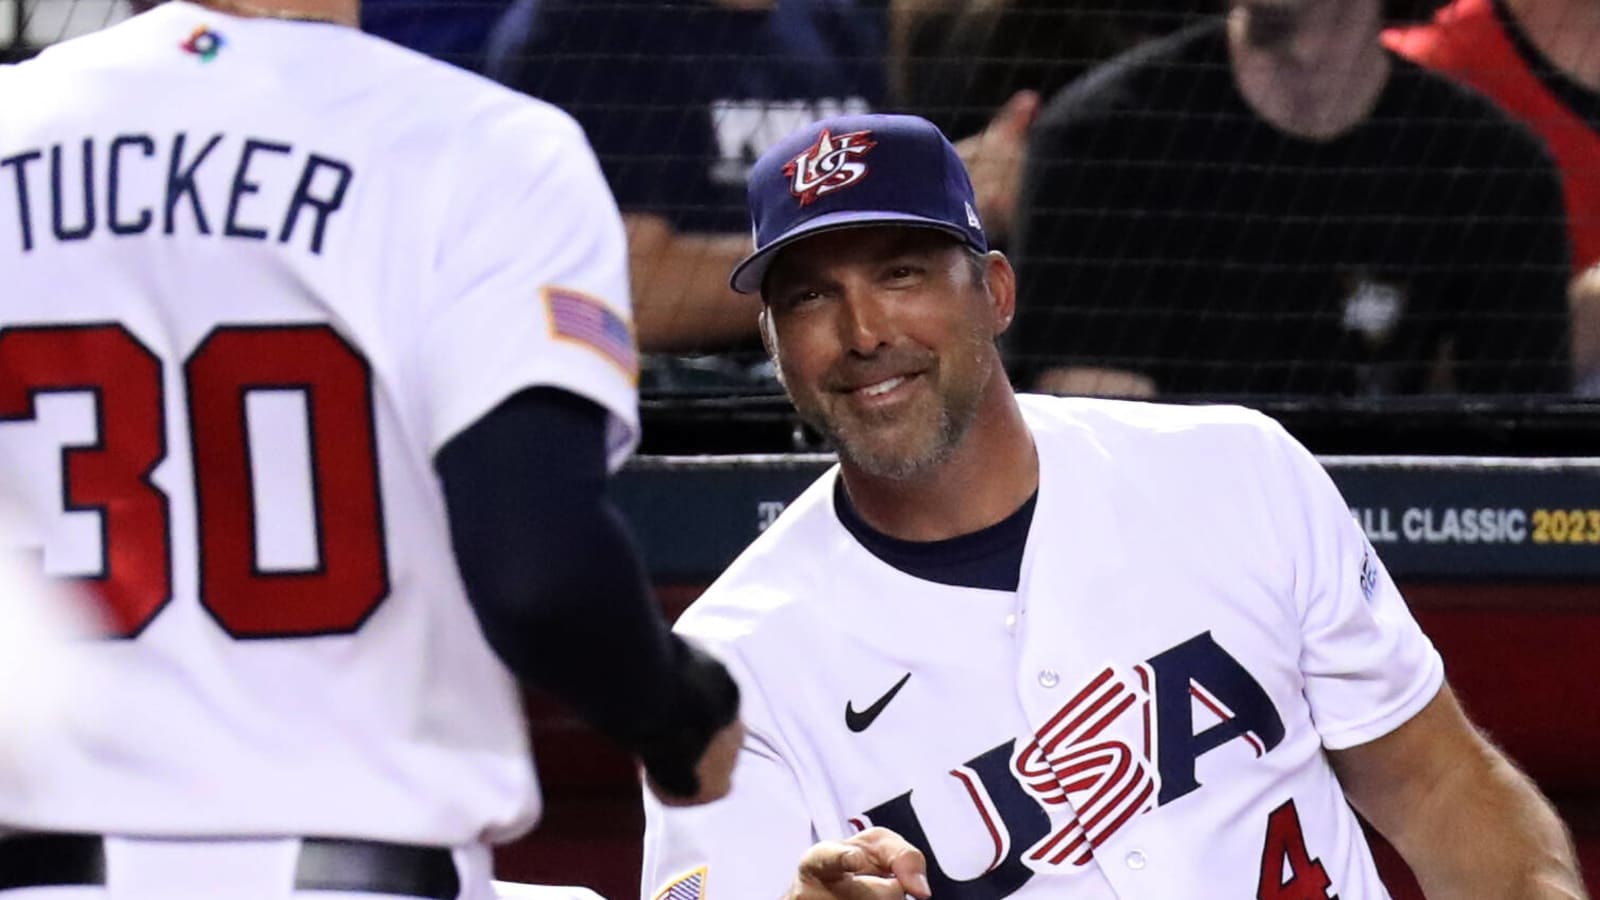 Team USA manager cites pitching restrictions as a factor in loss